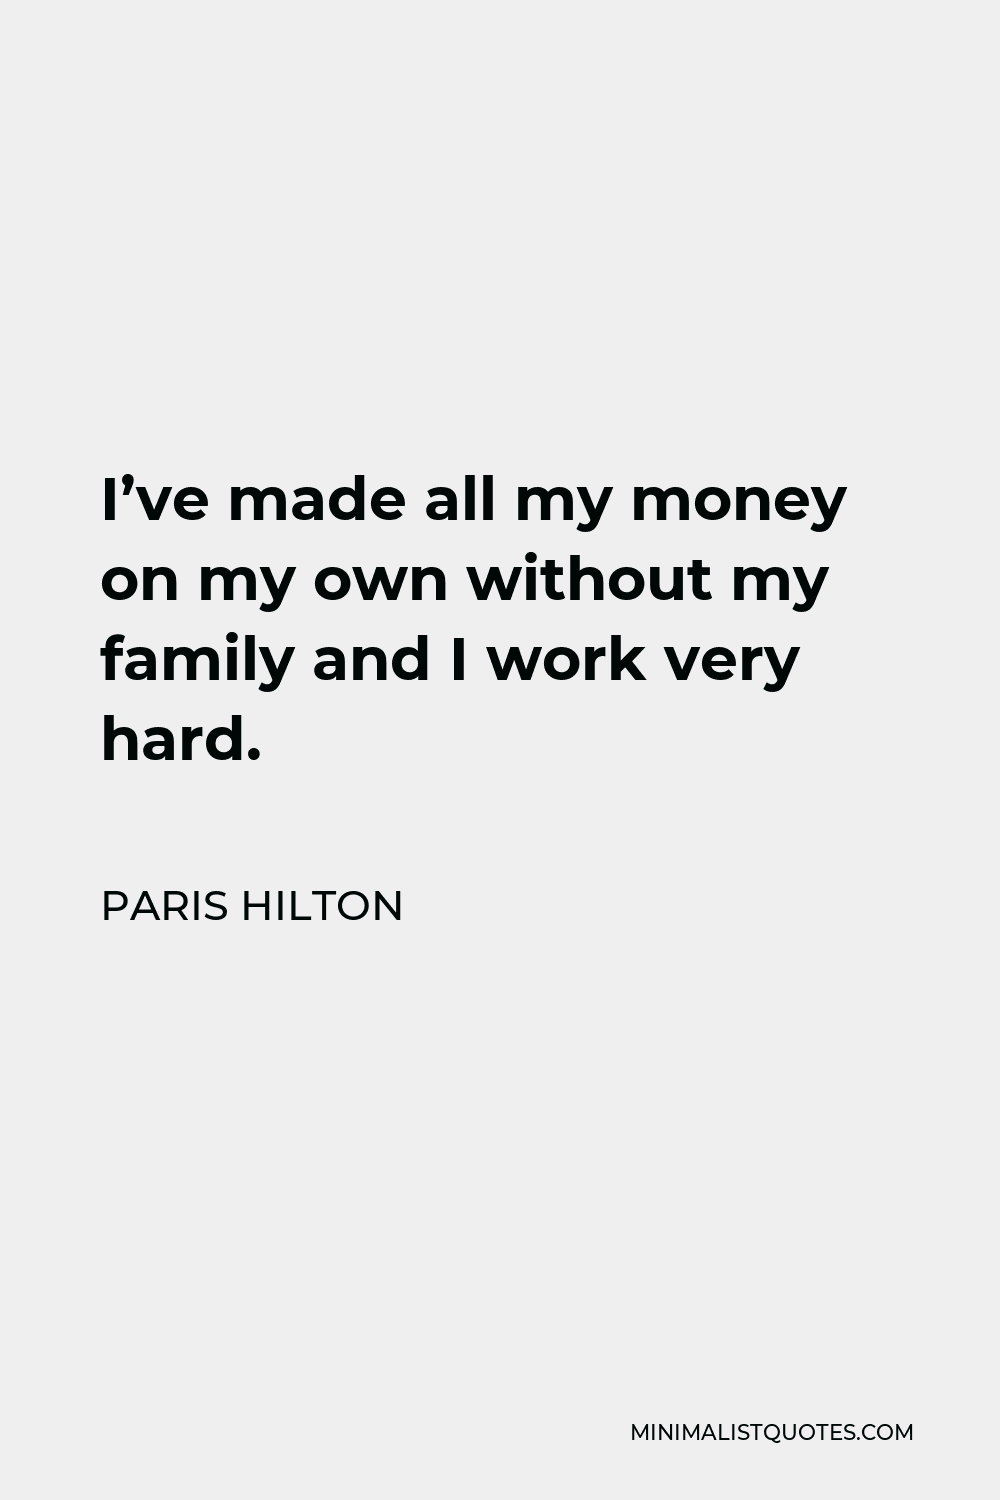 Paris Hilton Quote - I’ve made all my money on my own without my family and I work very hard.